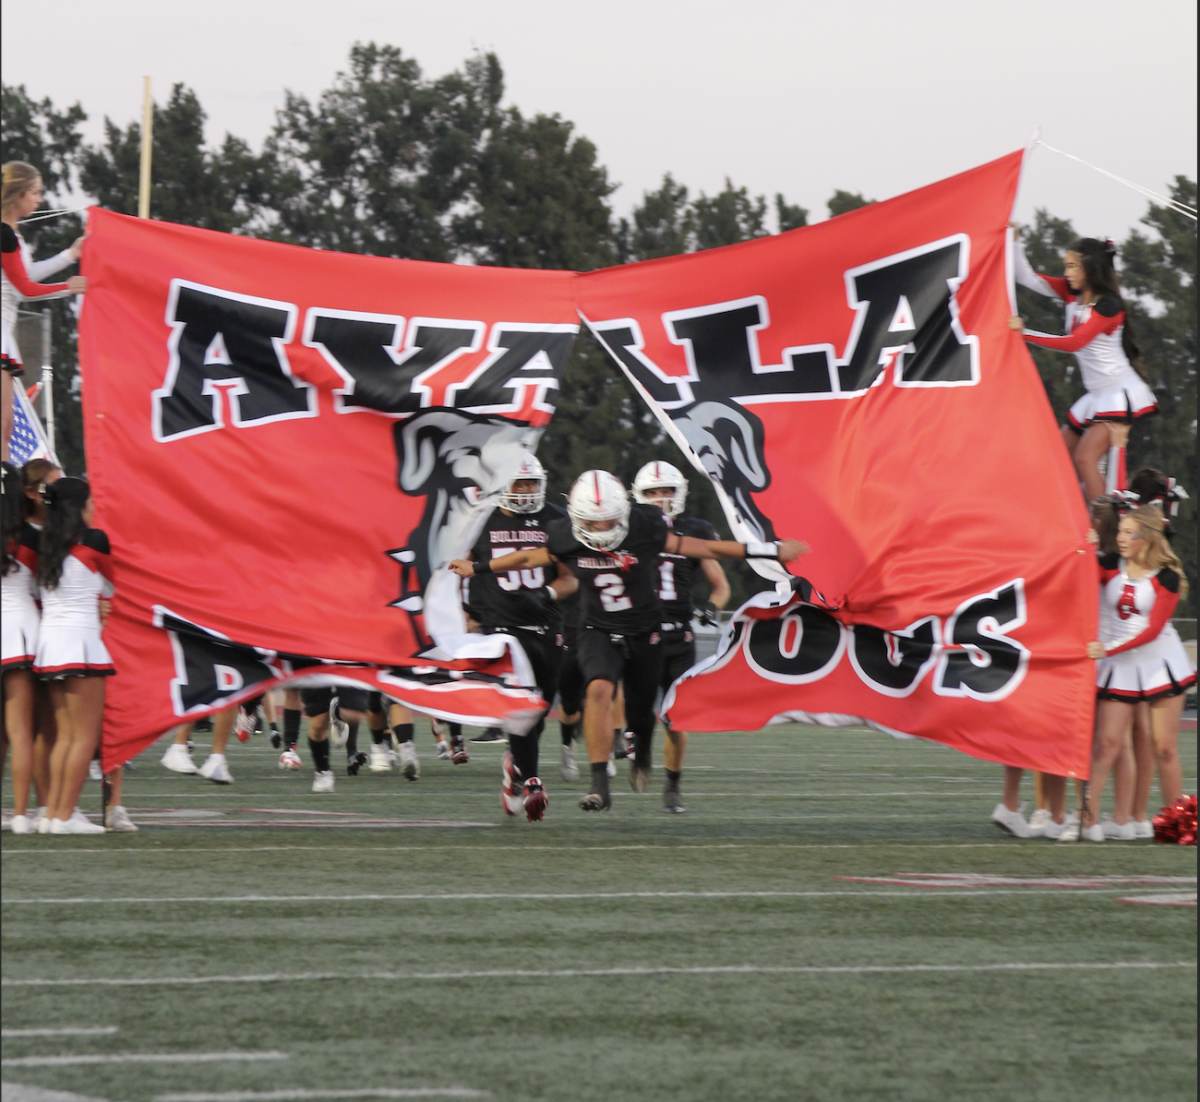 Backed with the support of almost one thousand students and parents, Ayala fought hard to protect their trophy for the sixth straight year on Battle for the Bone. As players stormed the field, roars from the stands shook the field and the freshly painted turf.